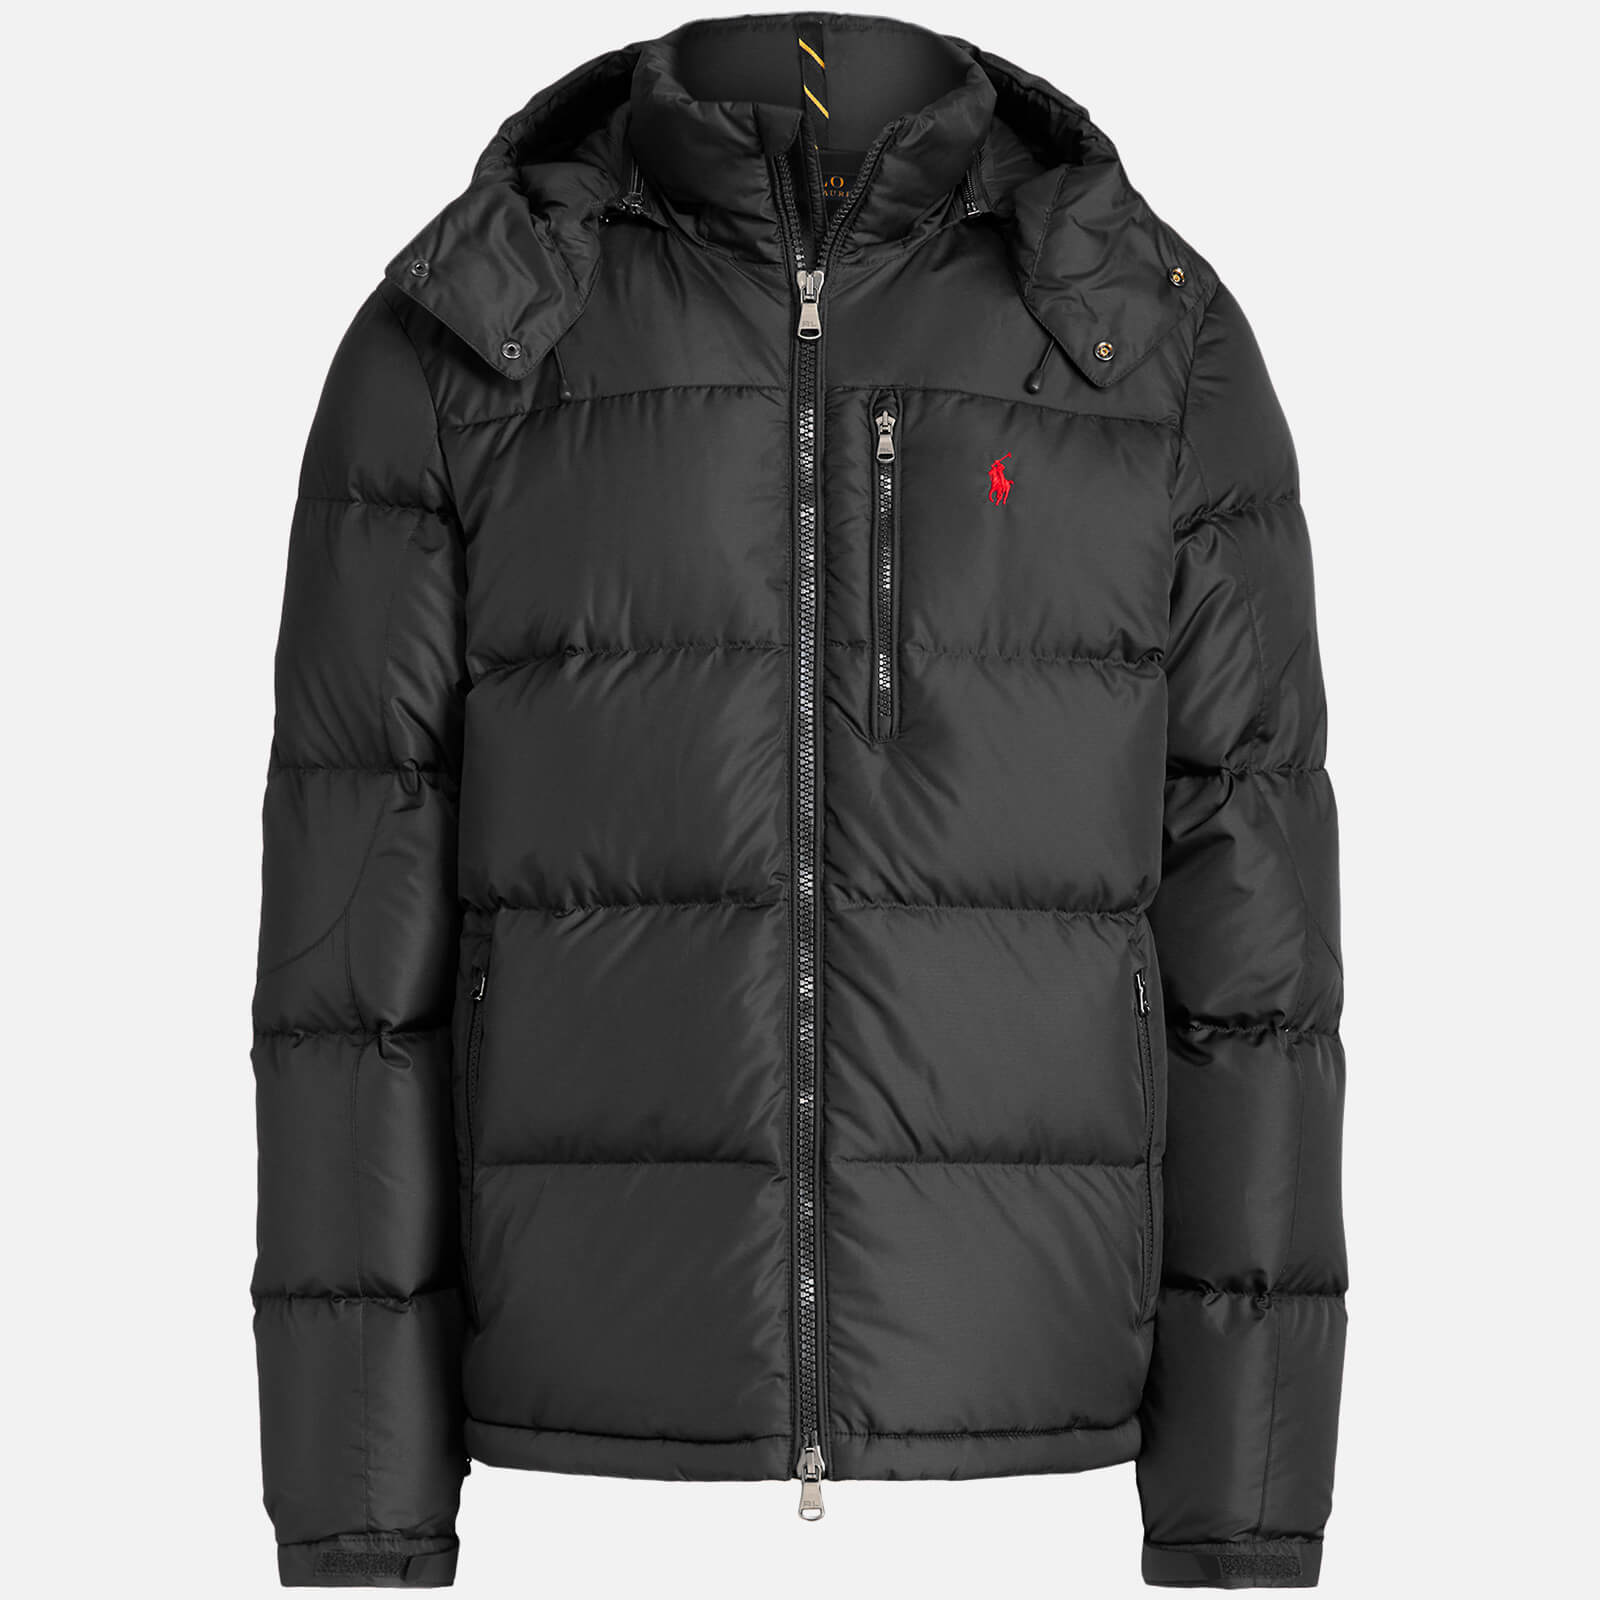 Polo Ralph Lauren Men's Recycled Polyester Jacket - Polo Black - M